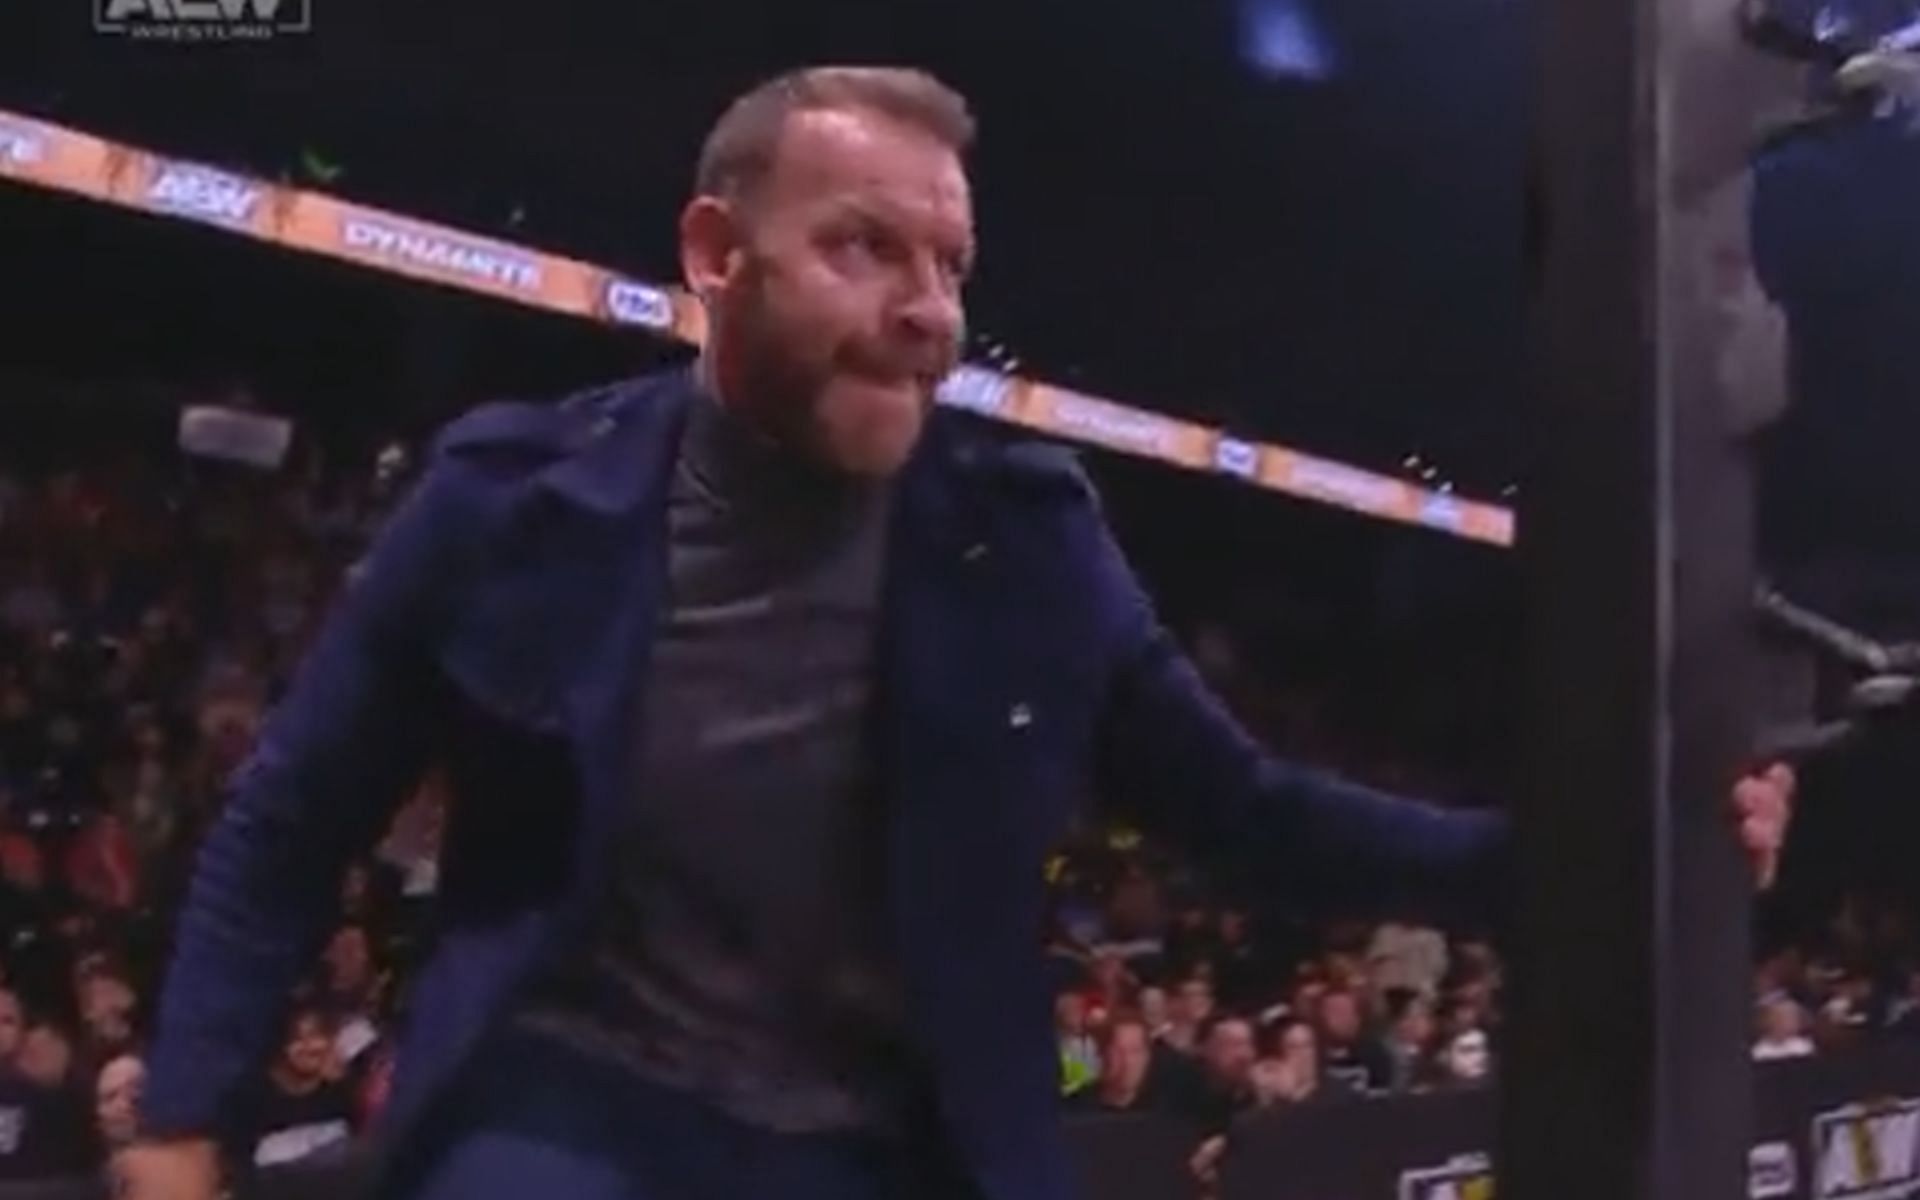 Christian Cage made an appearance once again on AEW Dynamite.